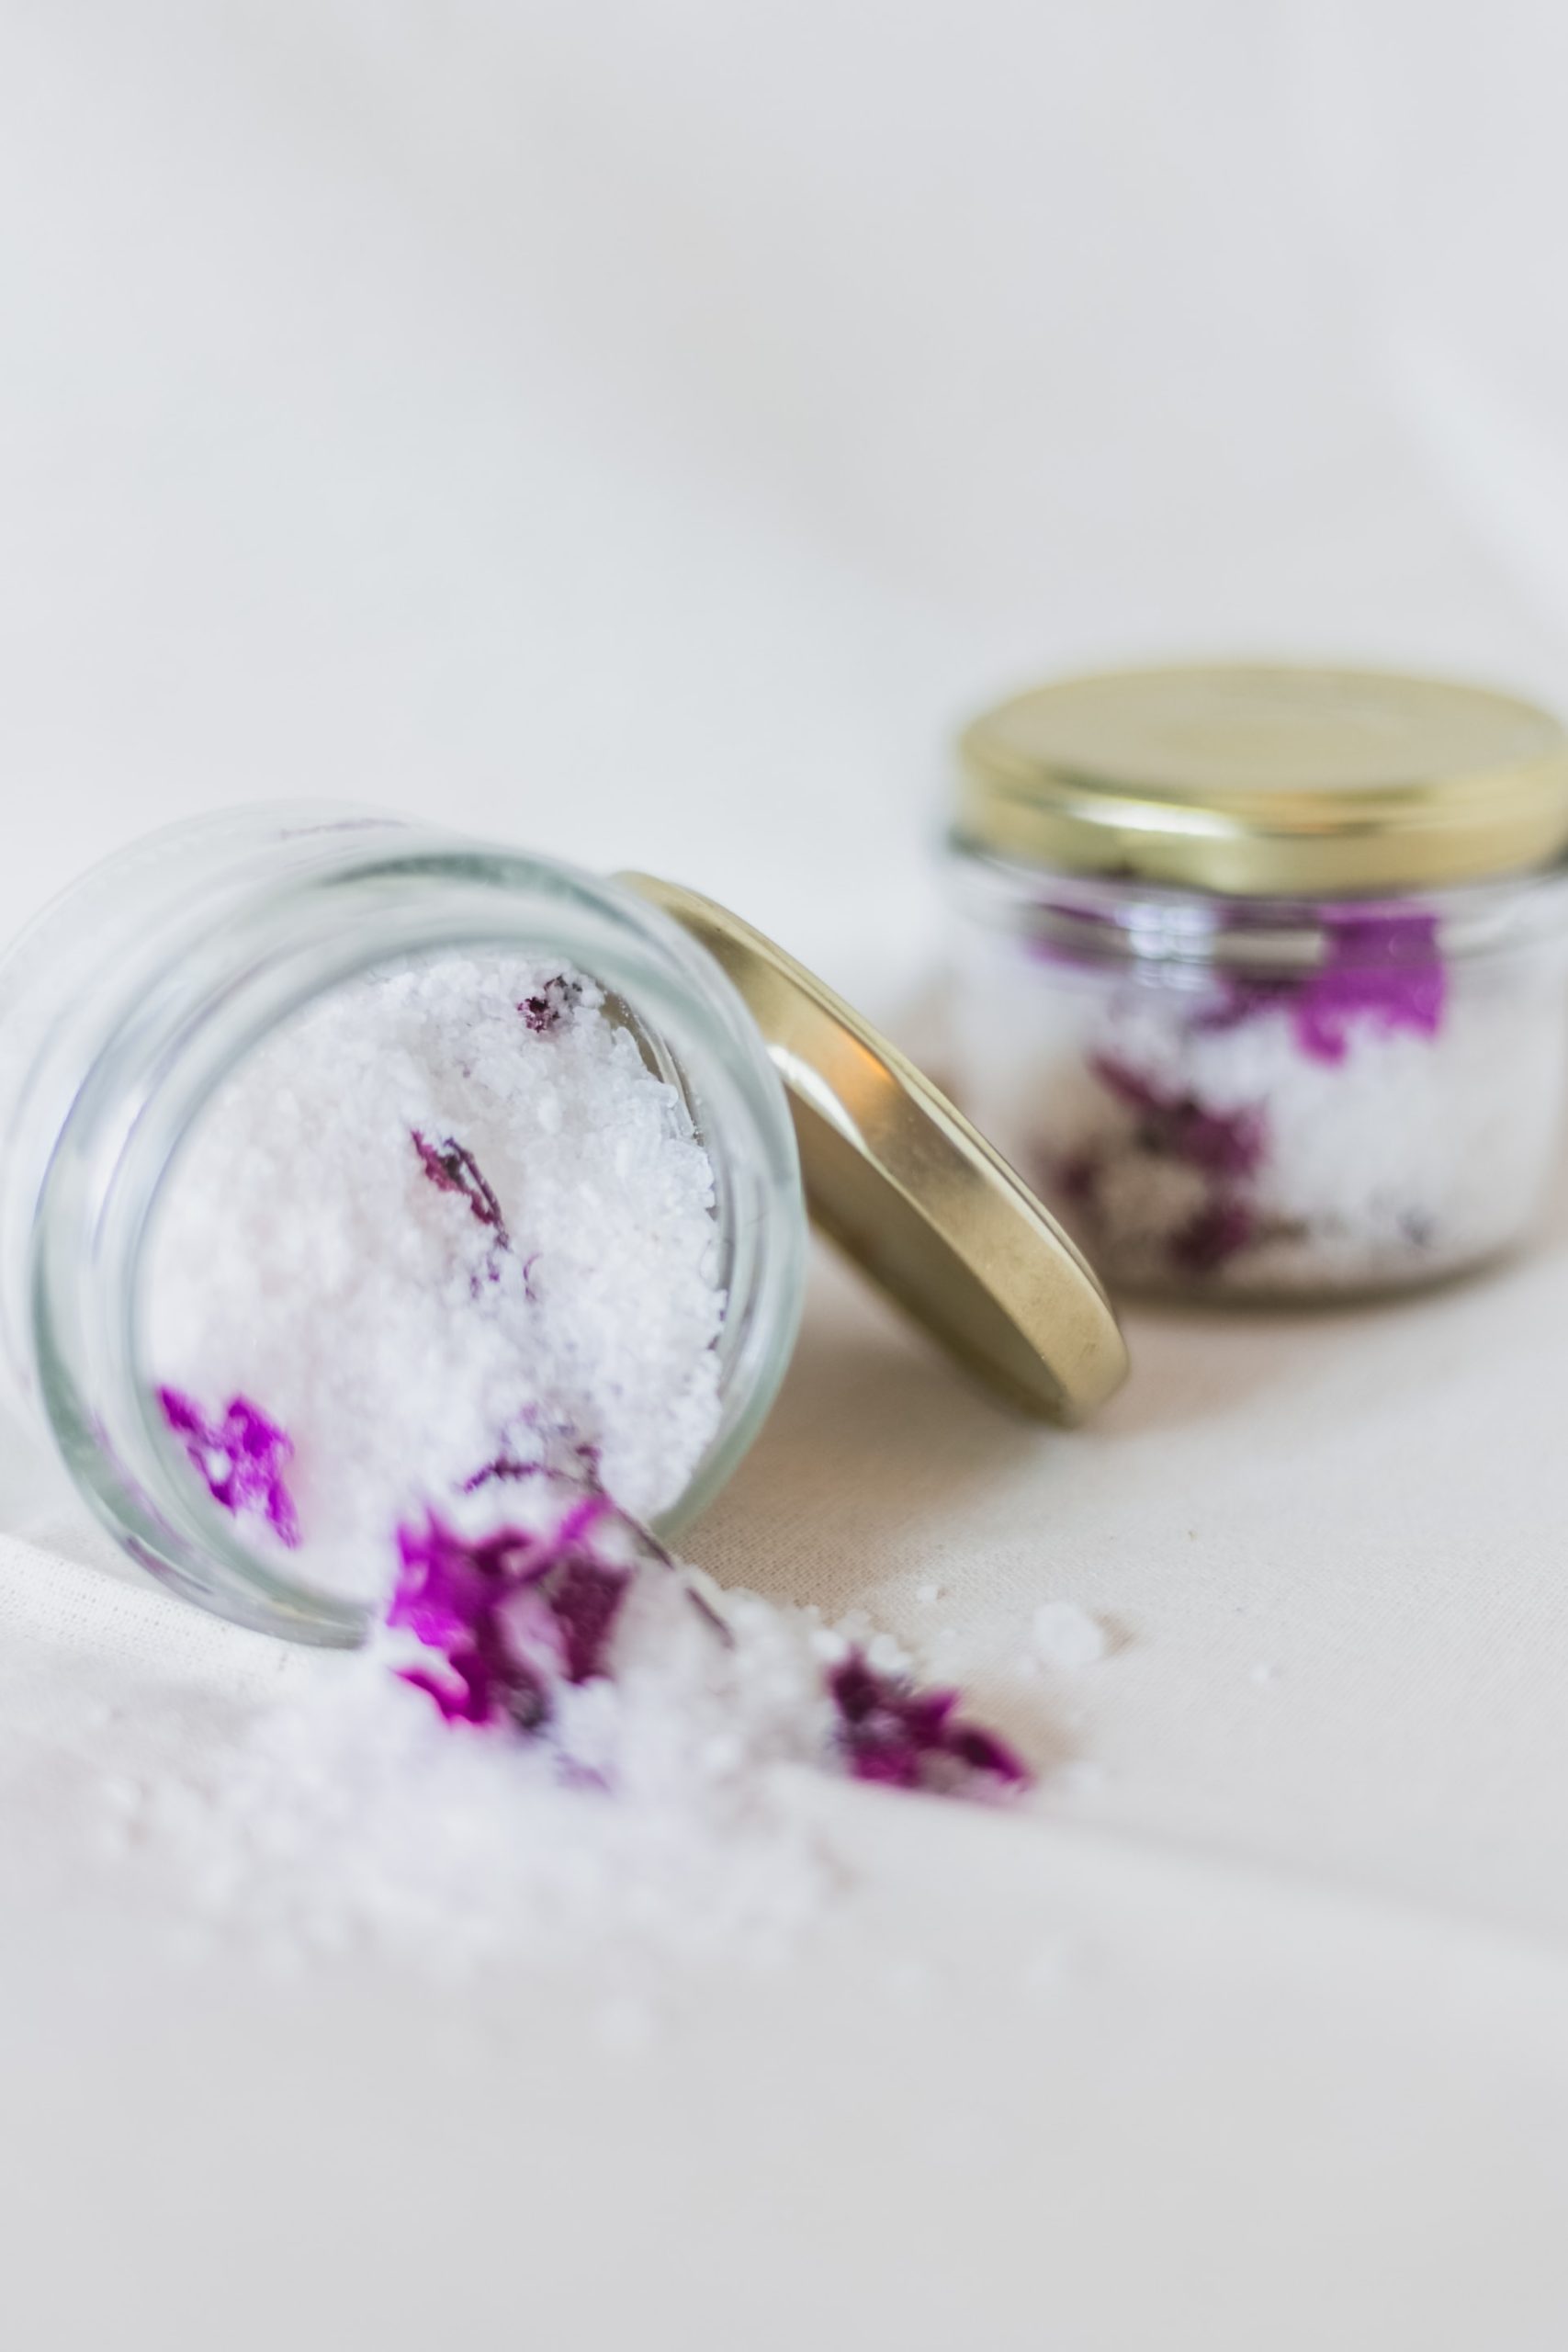 Homemade Salts with Dried Flowers